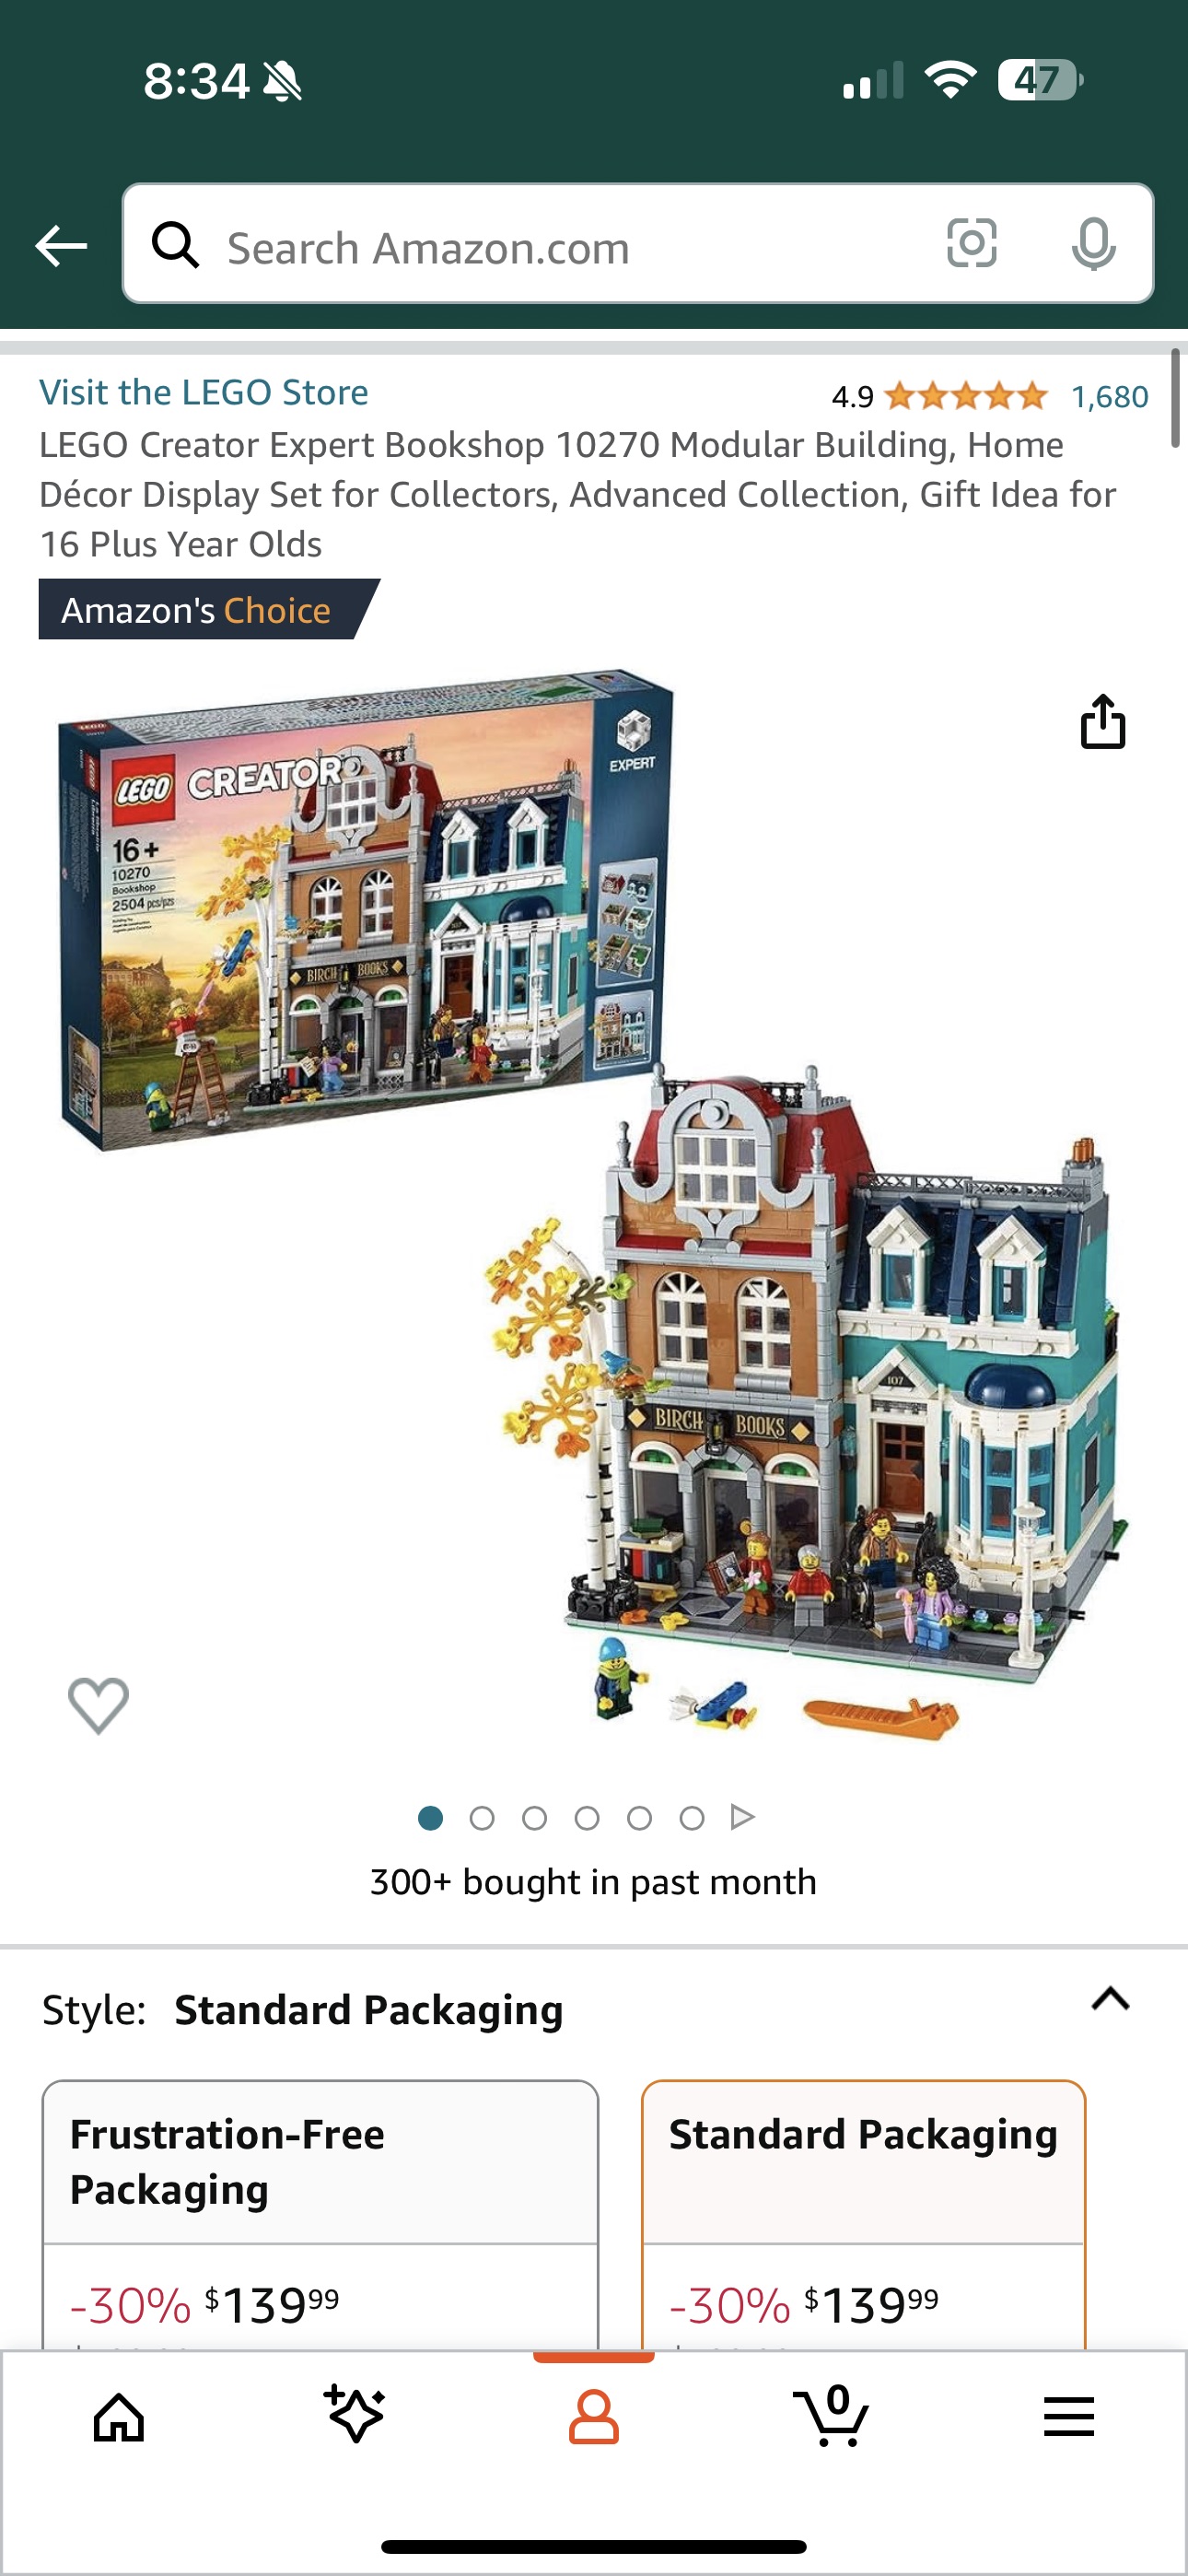 Amazon.com: LEGO Creator Expert Bookshop 10270 Modular Building, Home Décor Display Set for Collectors, Advanced Collection, Gift Idea for 16 Plus Year Olds : Lego: Toys & Games